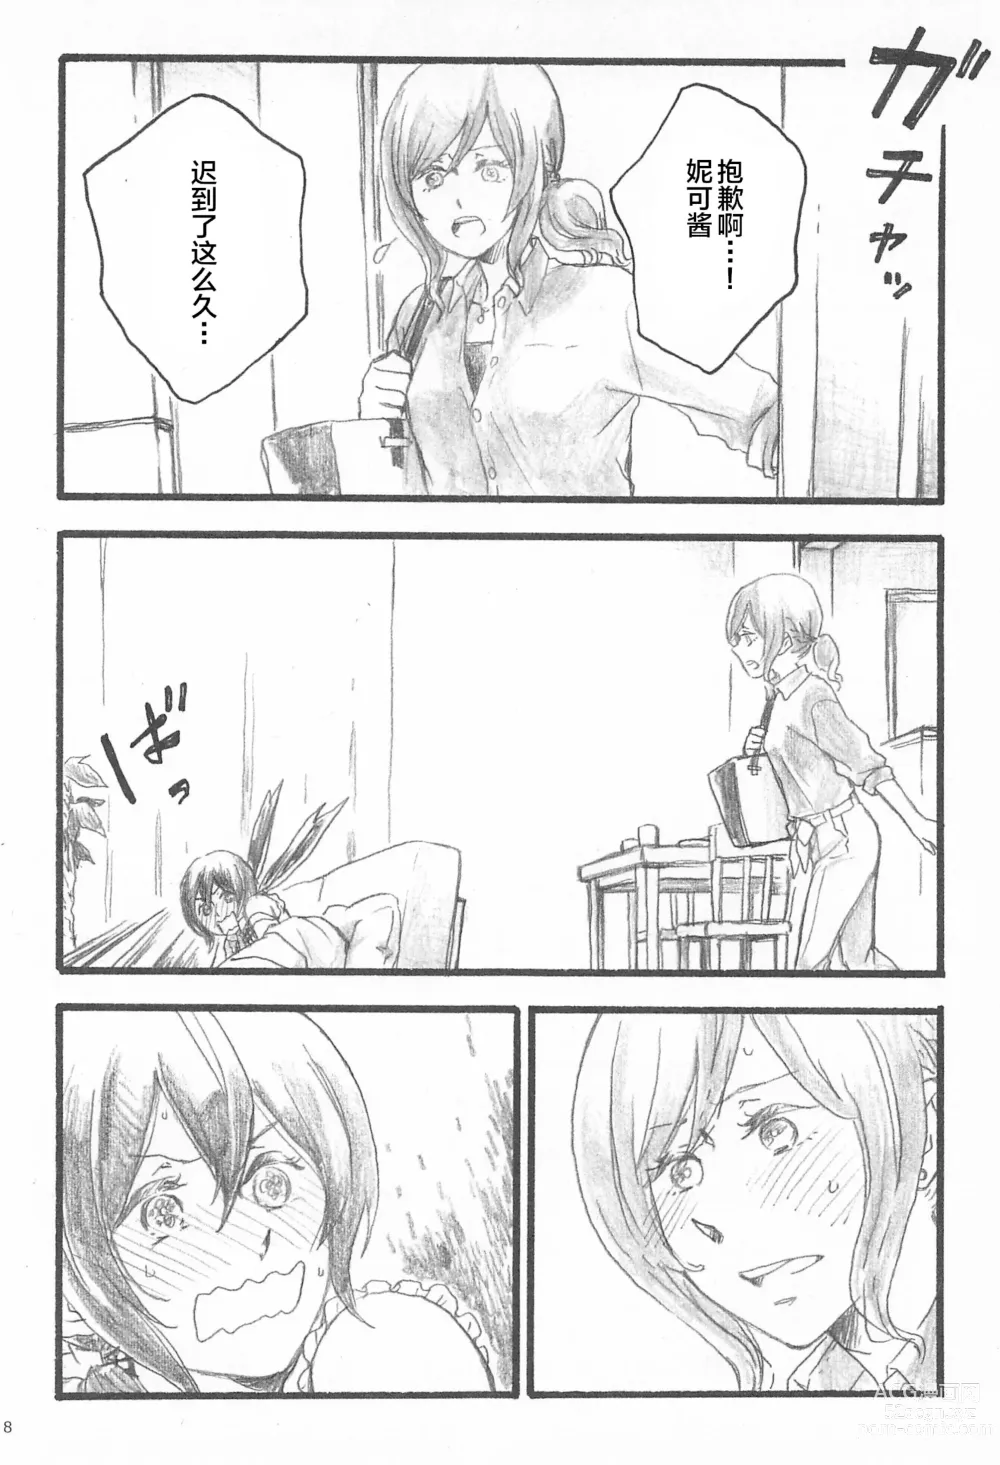 Page 8 of doujinshi Happiness